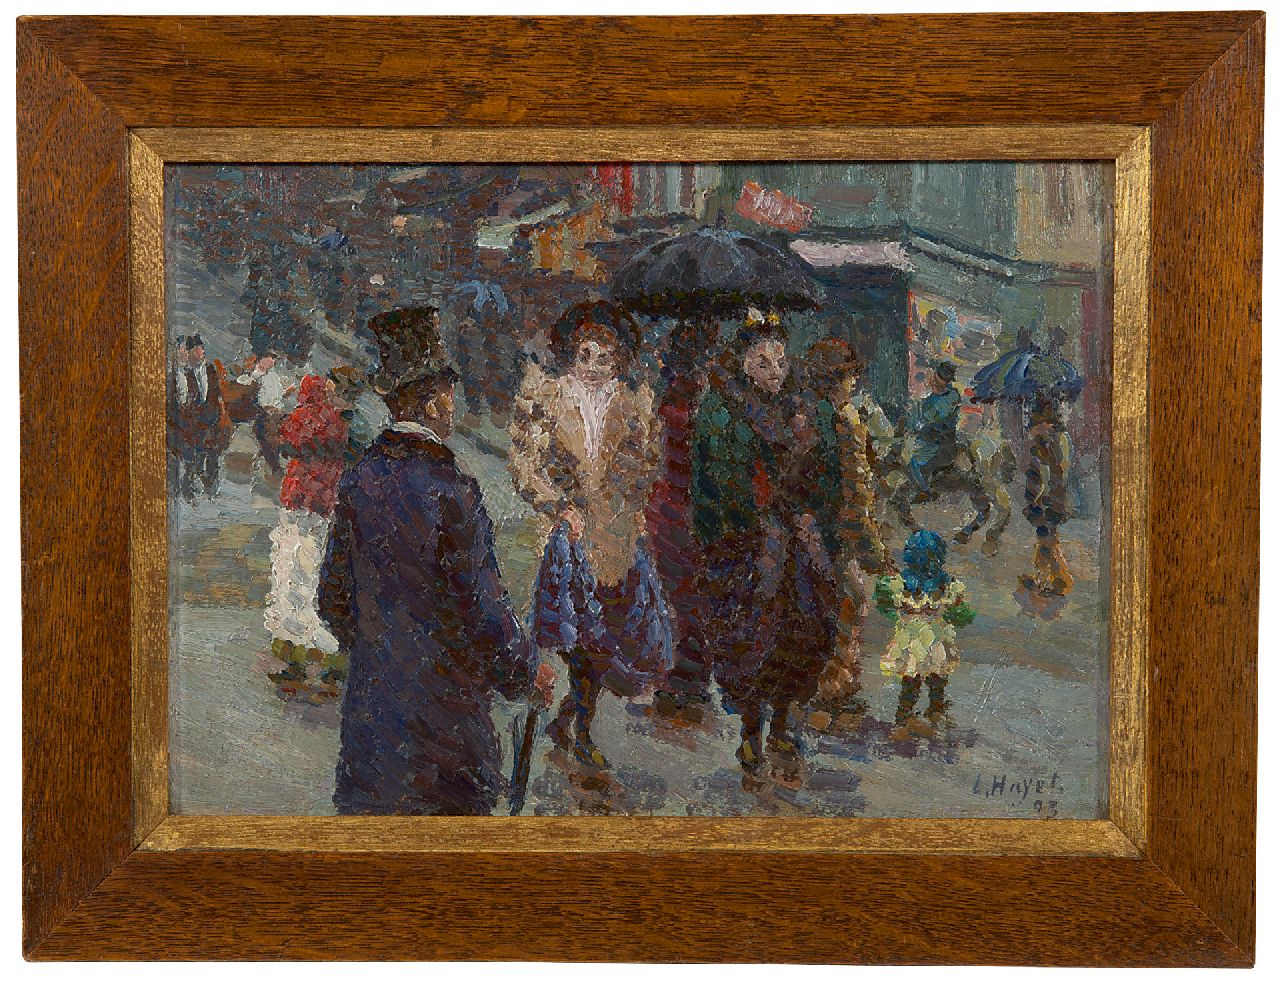 Hayet L.  | Louis Hayet | Paintings offered for sale | Strolling in the rain, oil on painter's board 19.5 x 27.6 cm, signed l.r. and dated '93